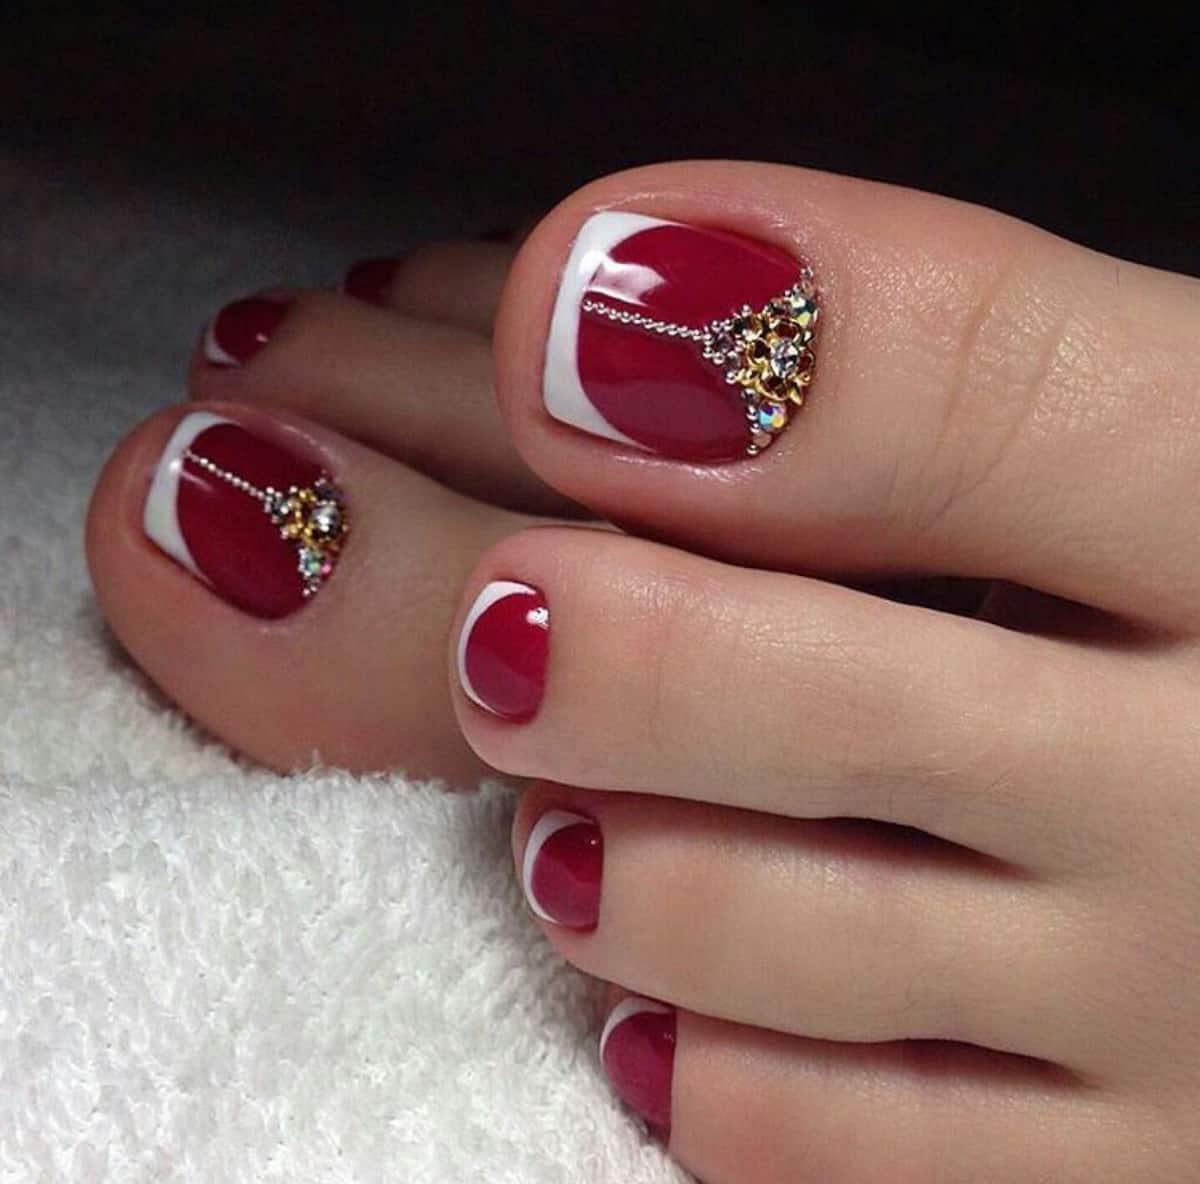 Nail art designs you must try out - Times of India